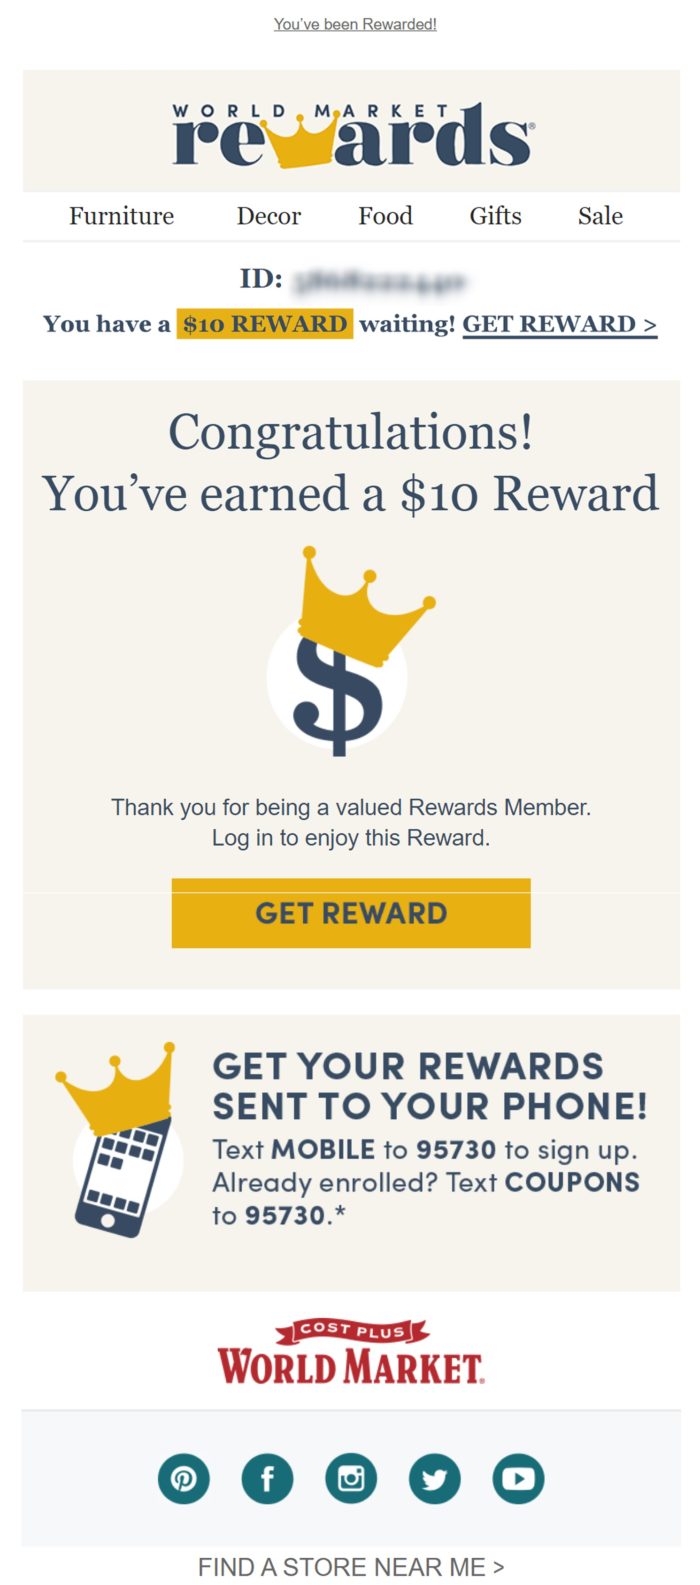 Make it easy to redeem points for loyalty programs